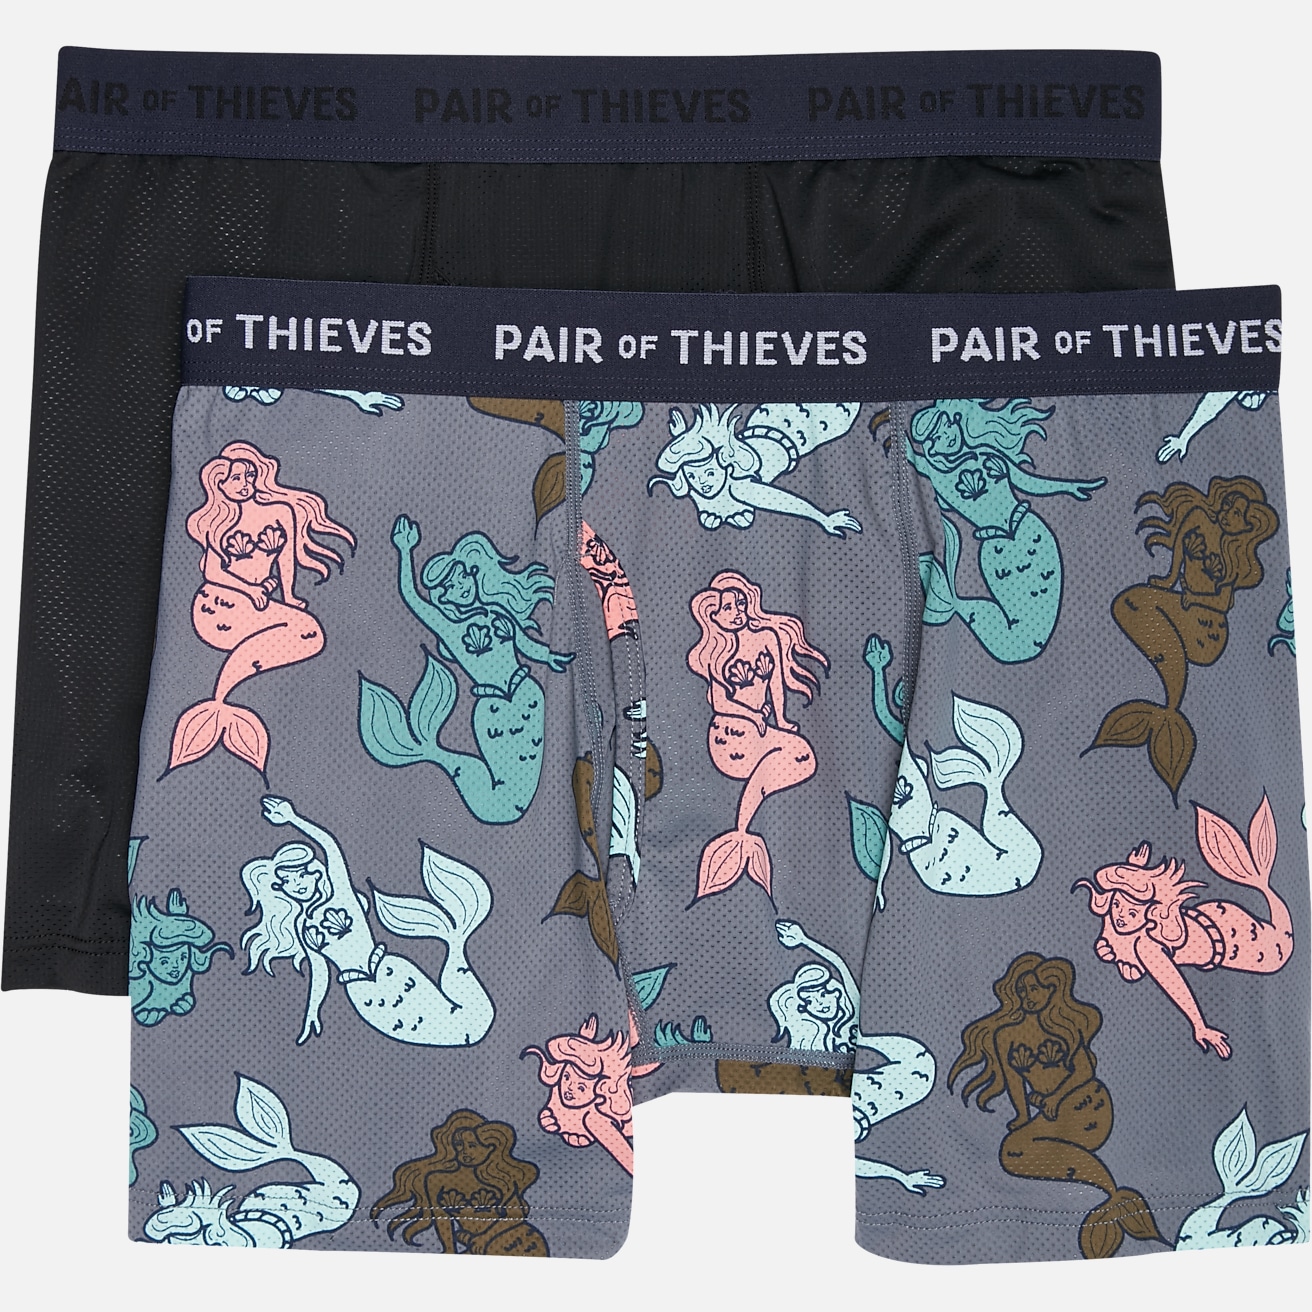 Pair of Thieves SuperFit Boxer Briefs Full Review How it works